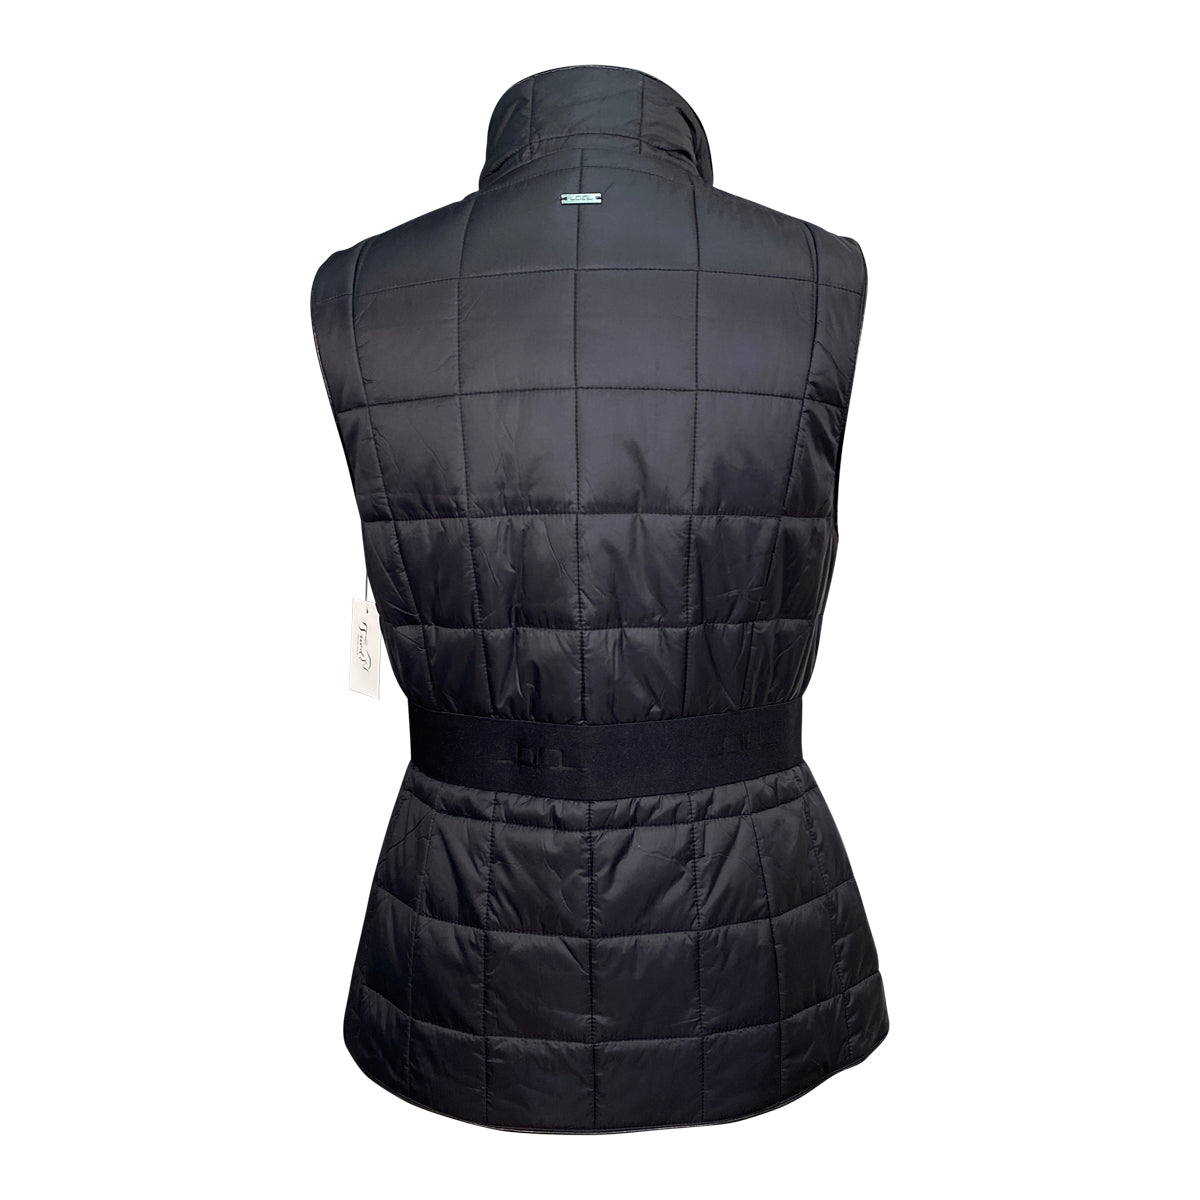 Alessandro Albanese 'Insula' Quilted Vest in Black